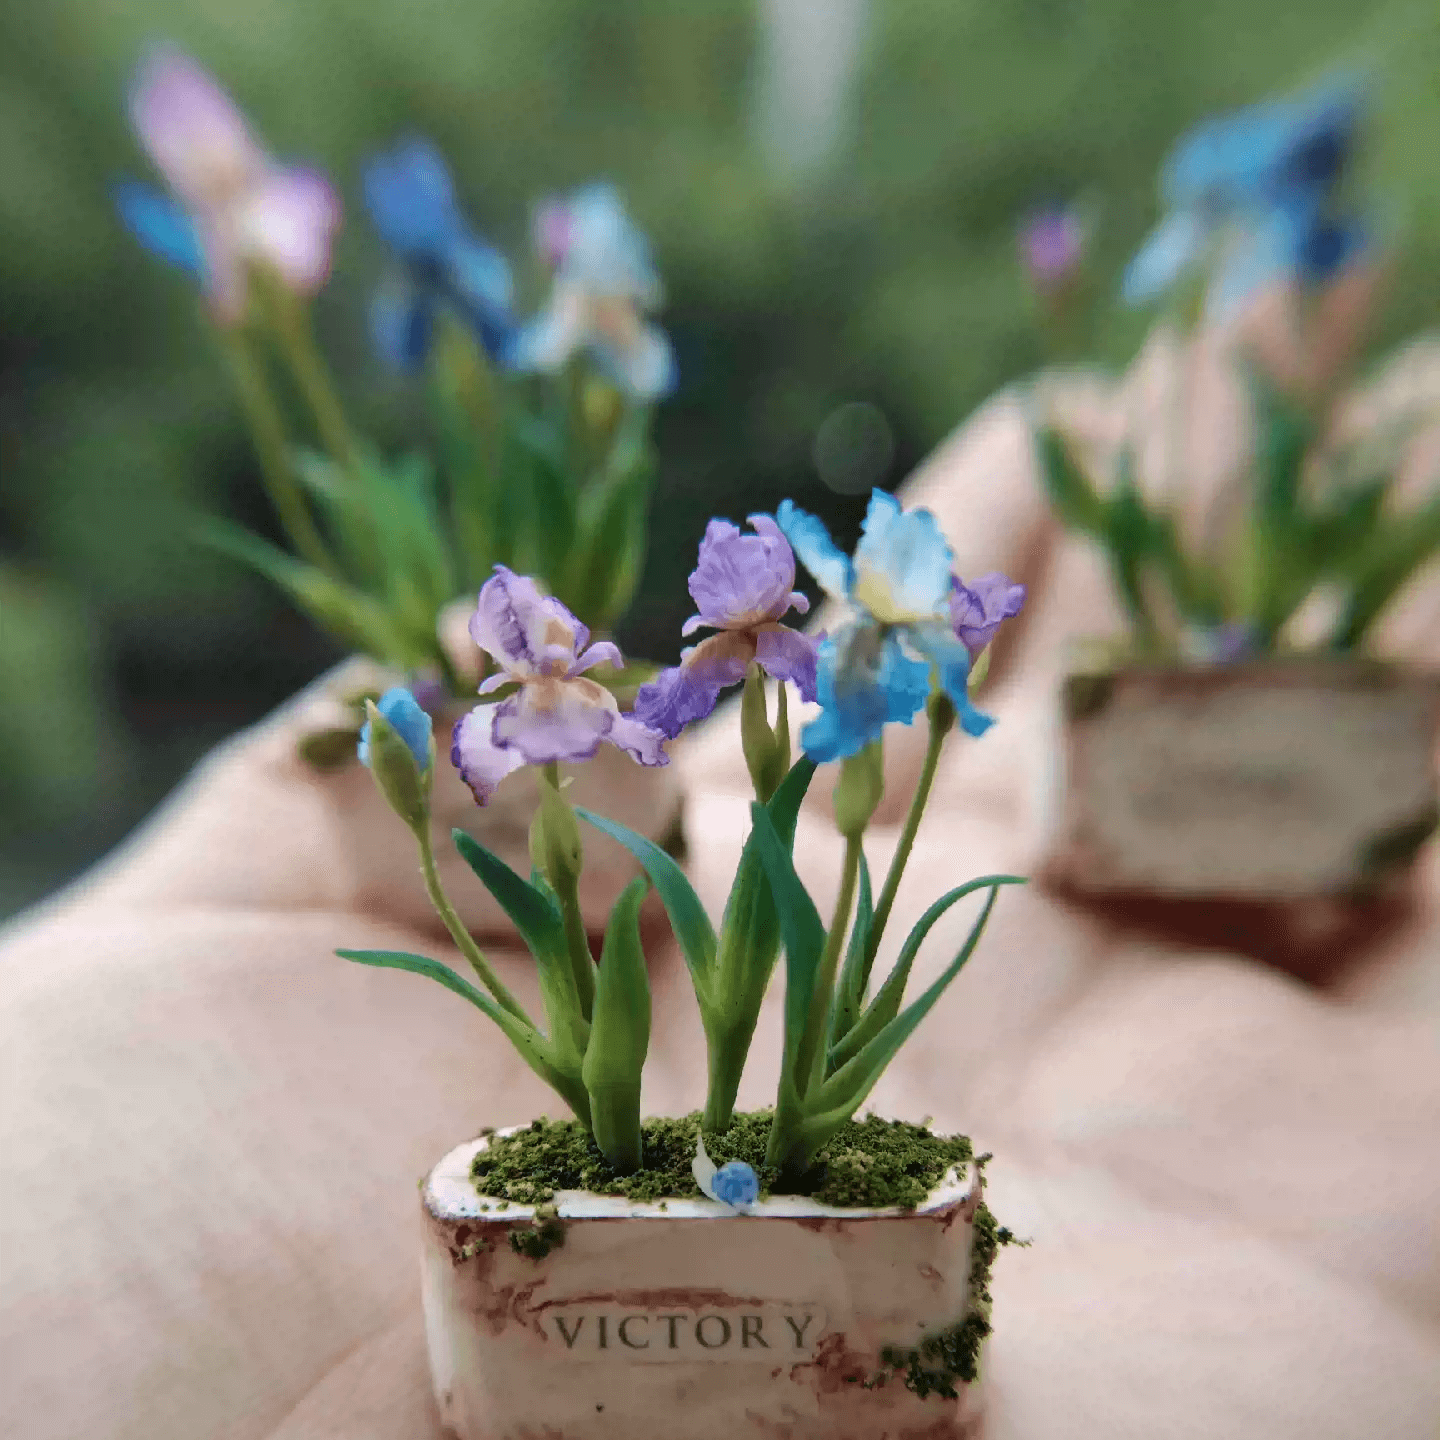 Iris tectorum (also known as roof iris, Japanese roof iris and wall iris) is a plant species in the genus Iris, it is also in the subgenus Limniris.  Material: Handmade from Clay